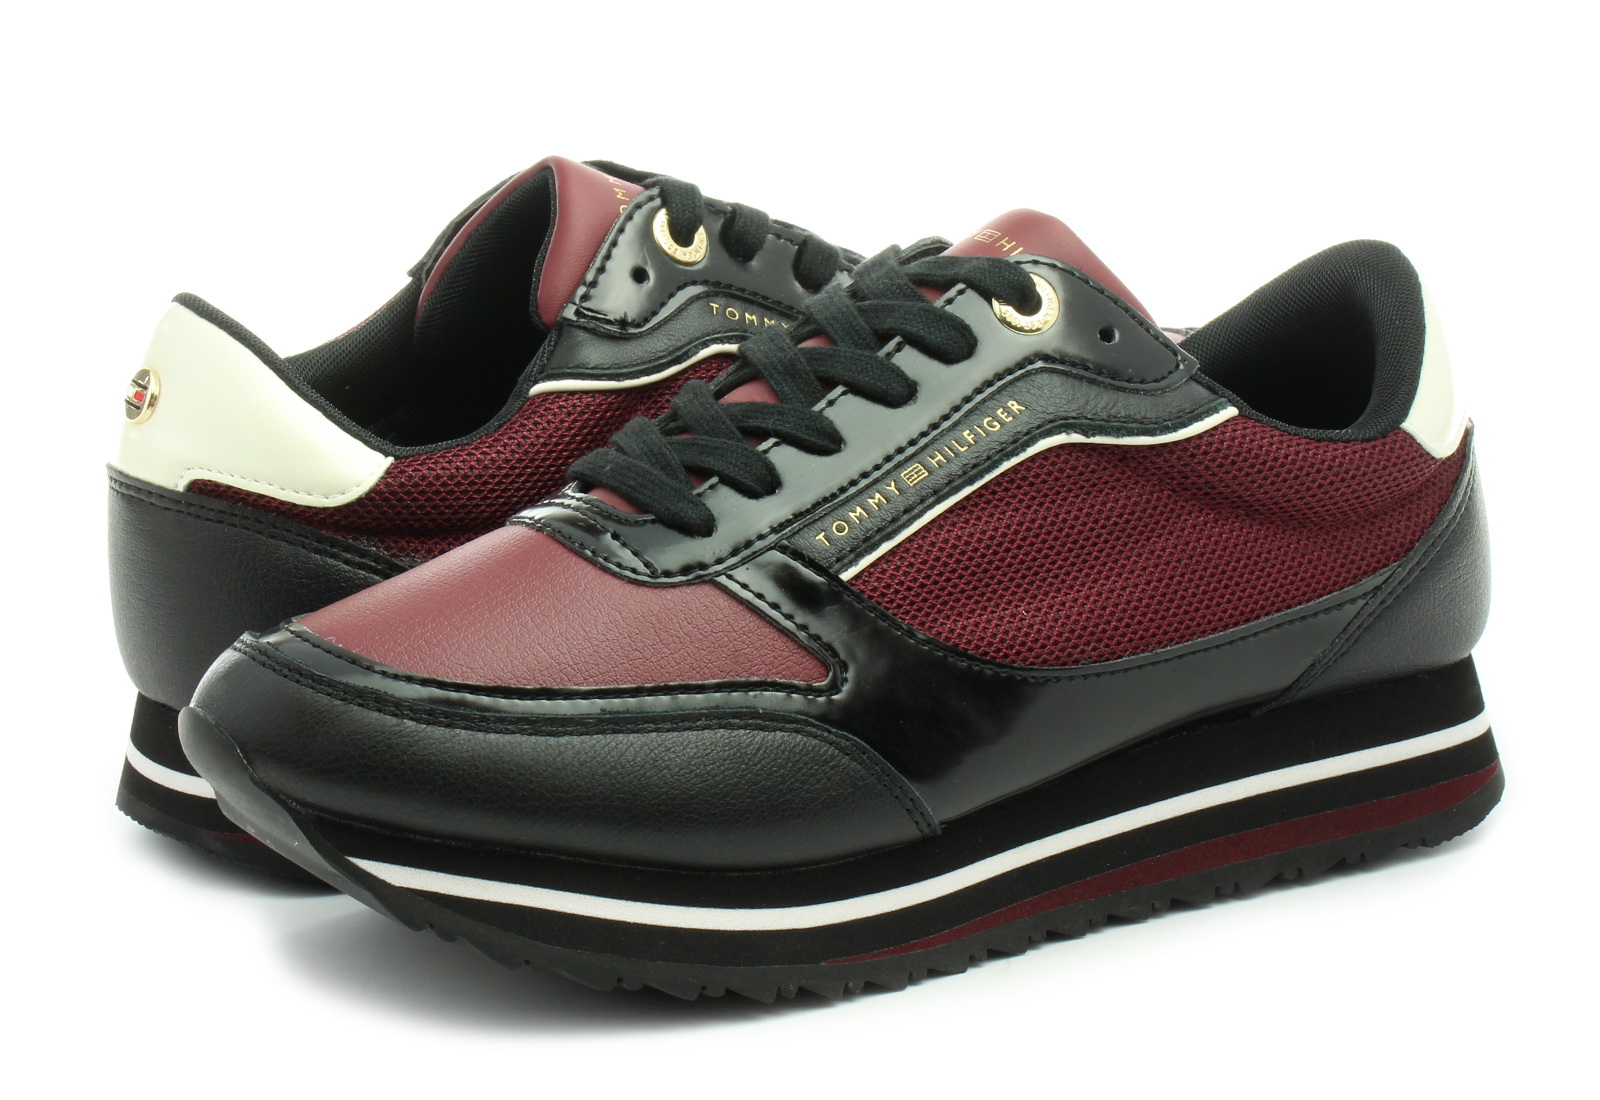 Perpetual Frail from now on Tommy Hilfiger Pantofi sport - Aangel 12c - 19F-4305-GBY - Office Shoes  Romania